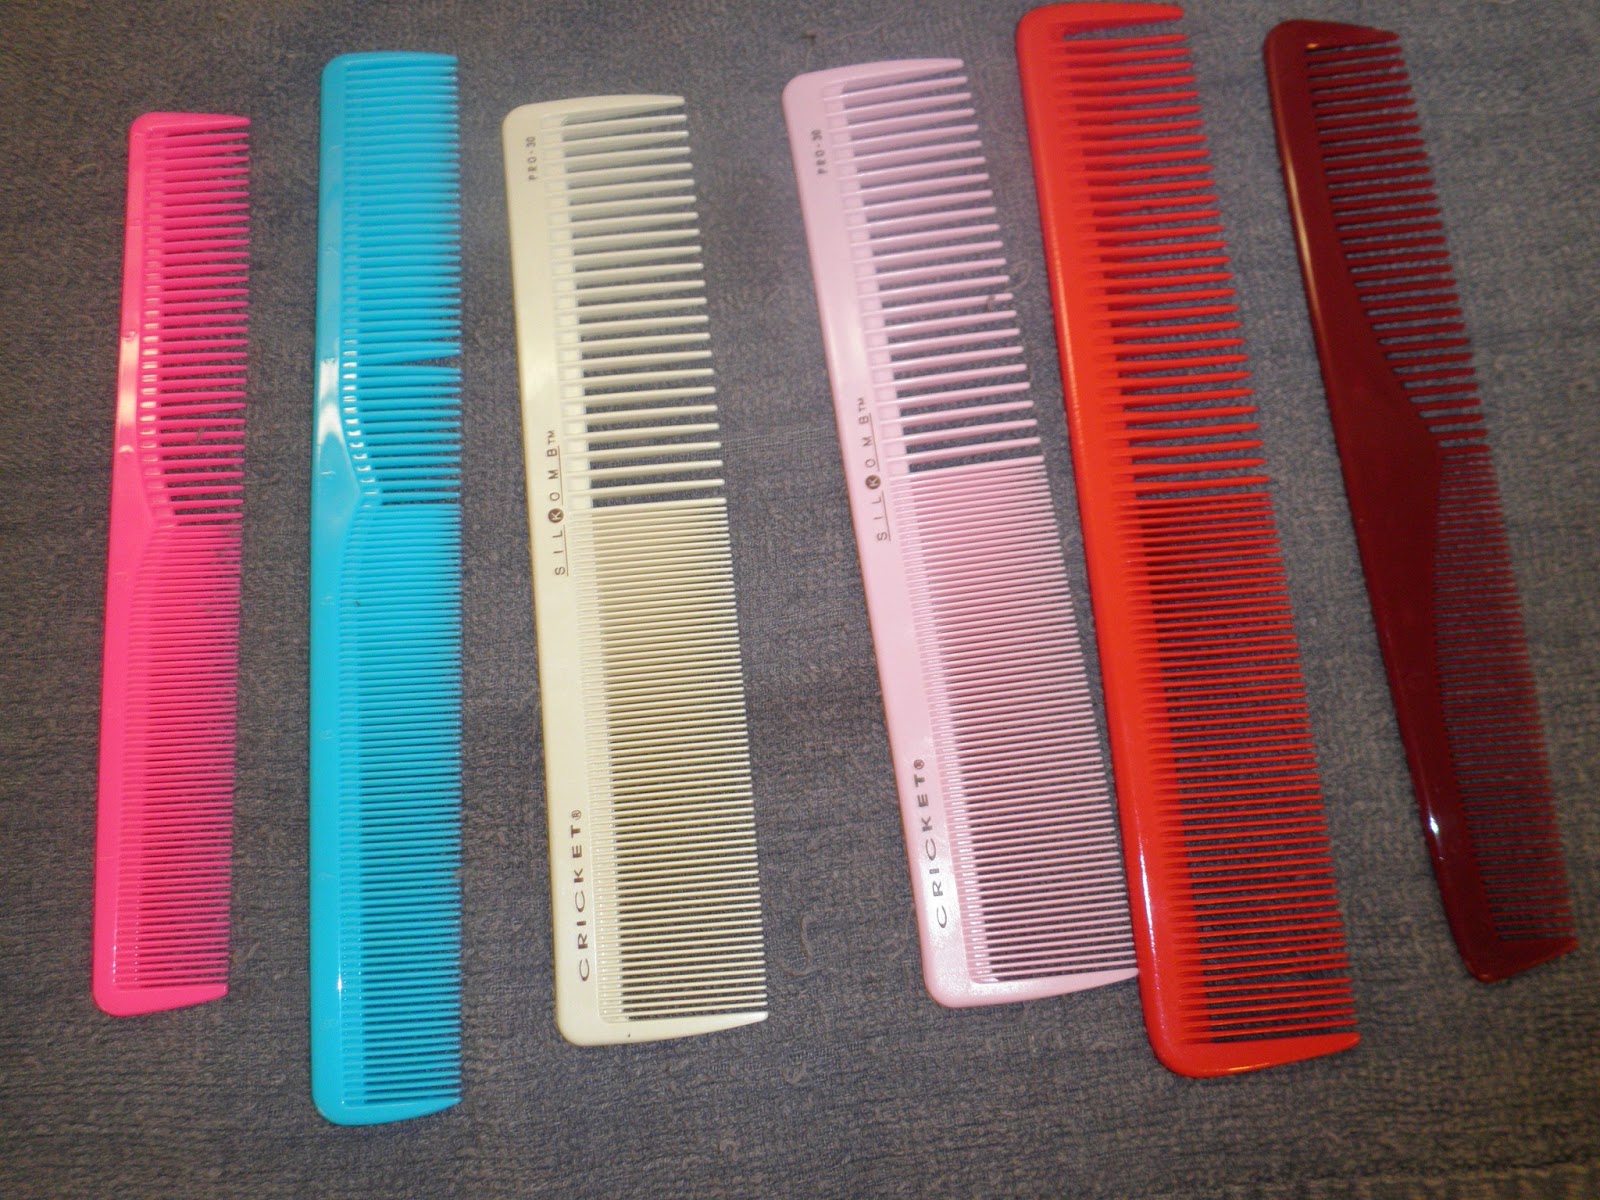 PhenomenalhairCare: Hair Combs: Colors, Shapes, and Quality